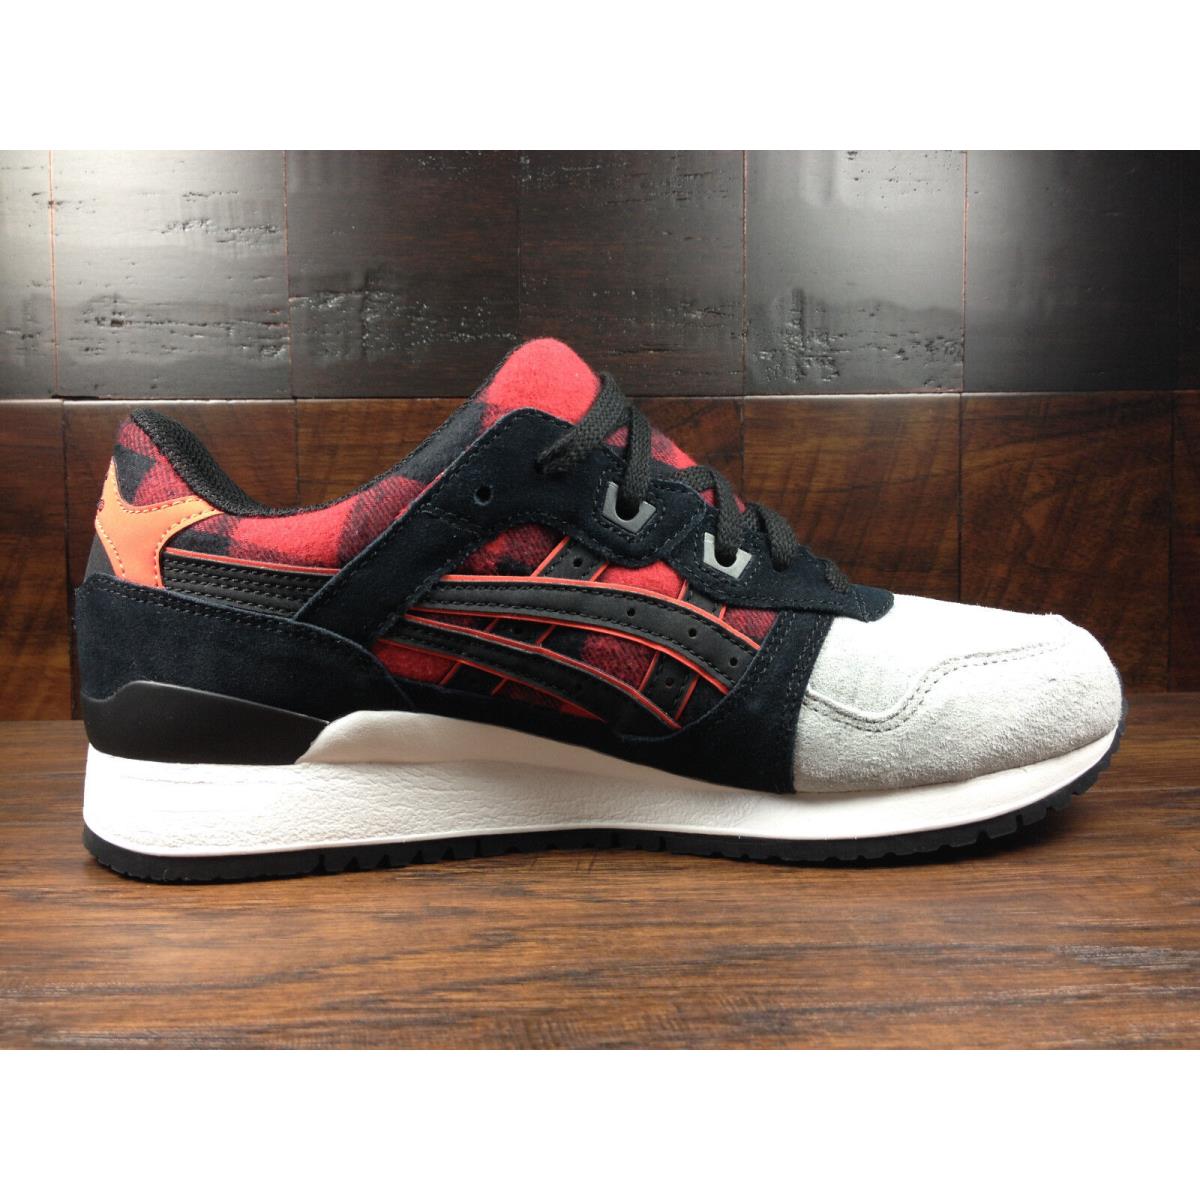 ASICS shoes III - Red / Black 1